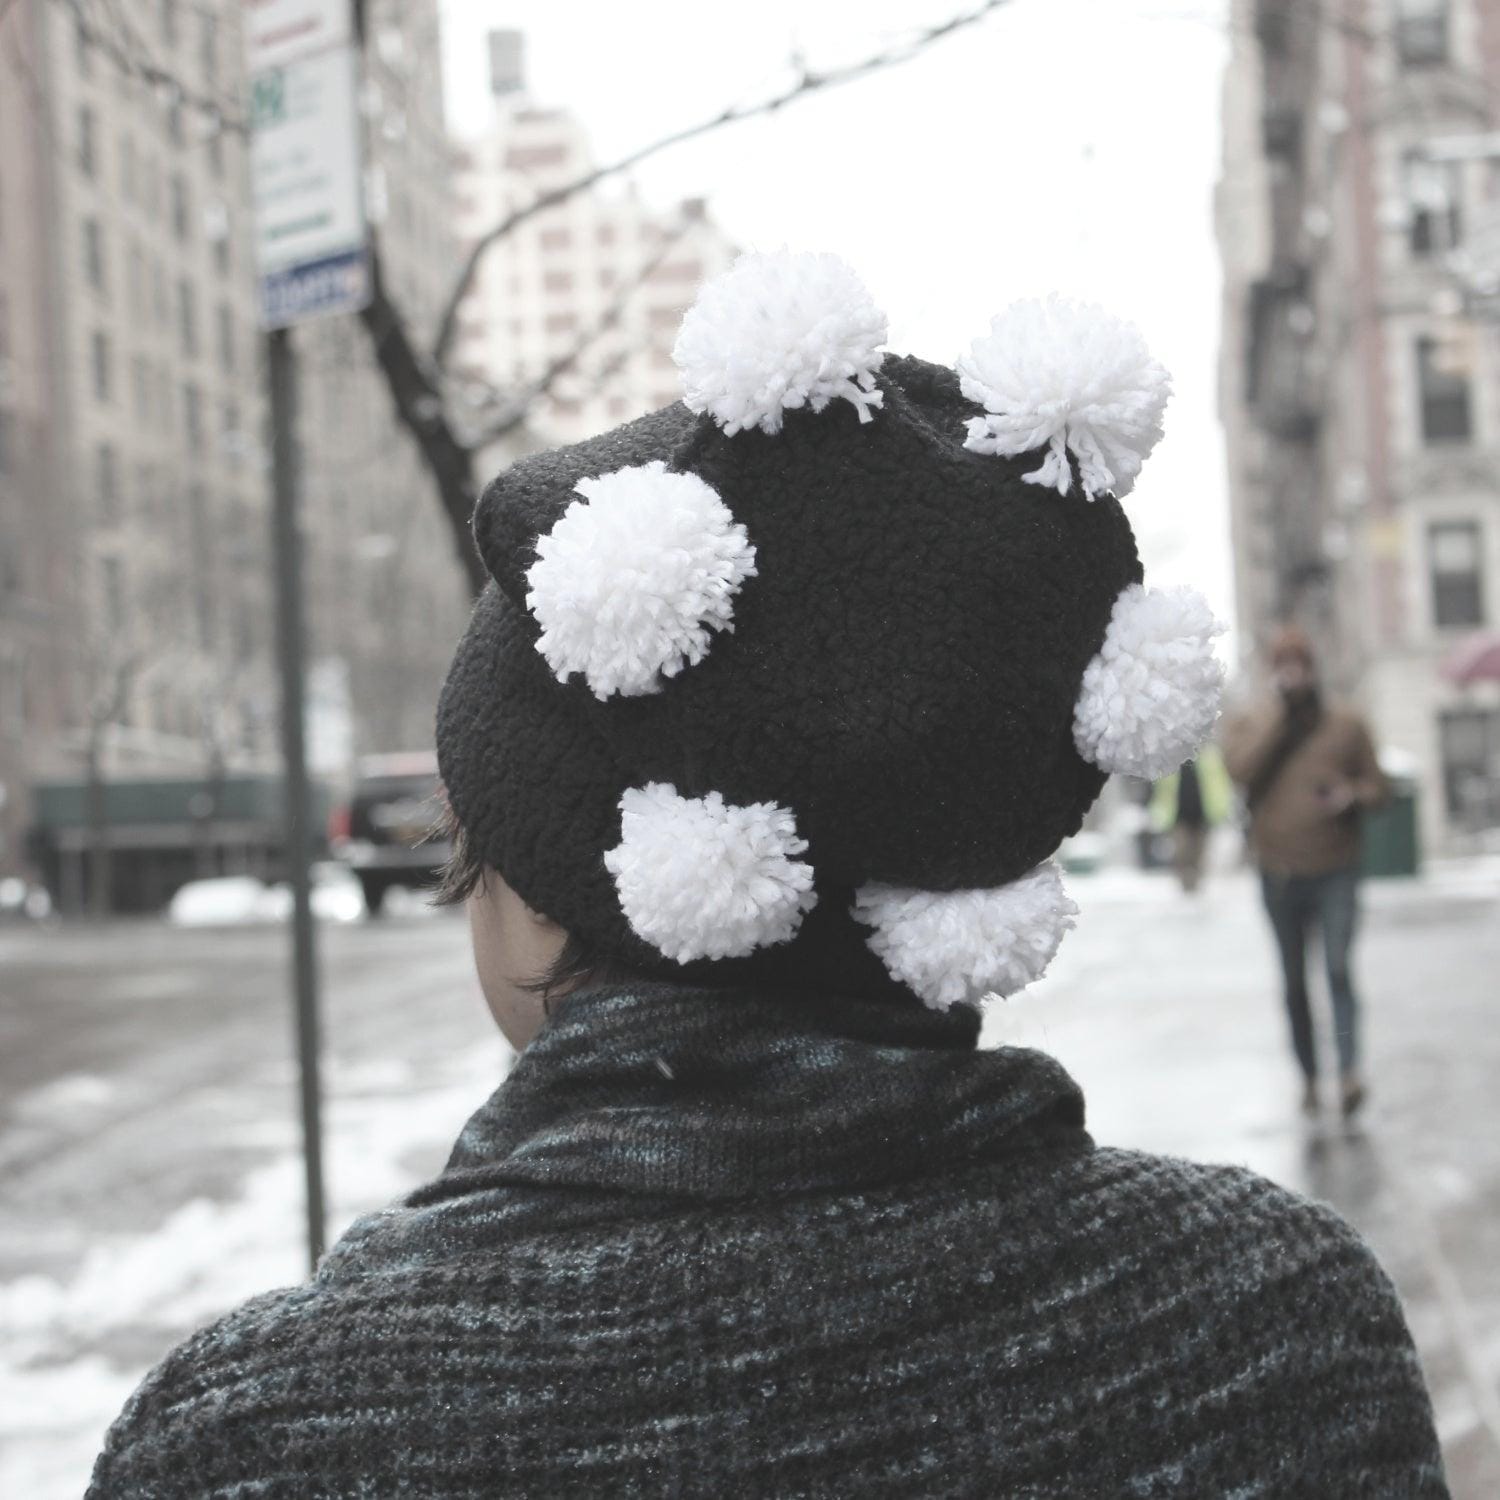 Back view of Soft Women's Hat Black with white pom poms crowning the top.